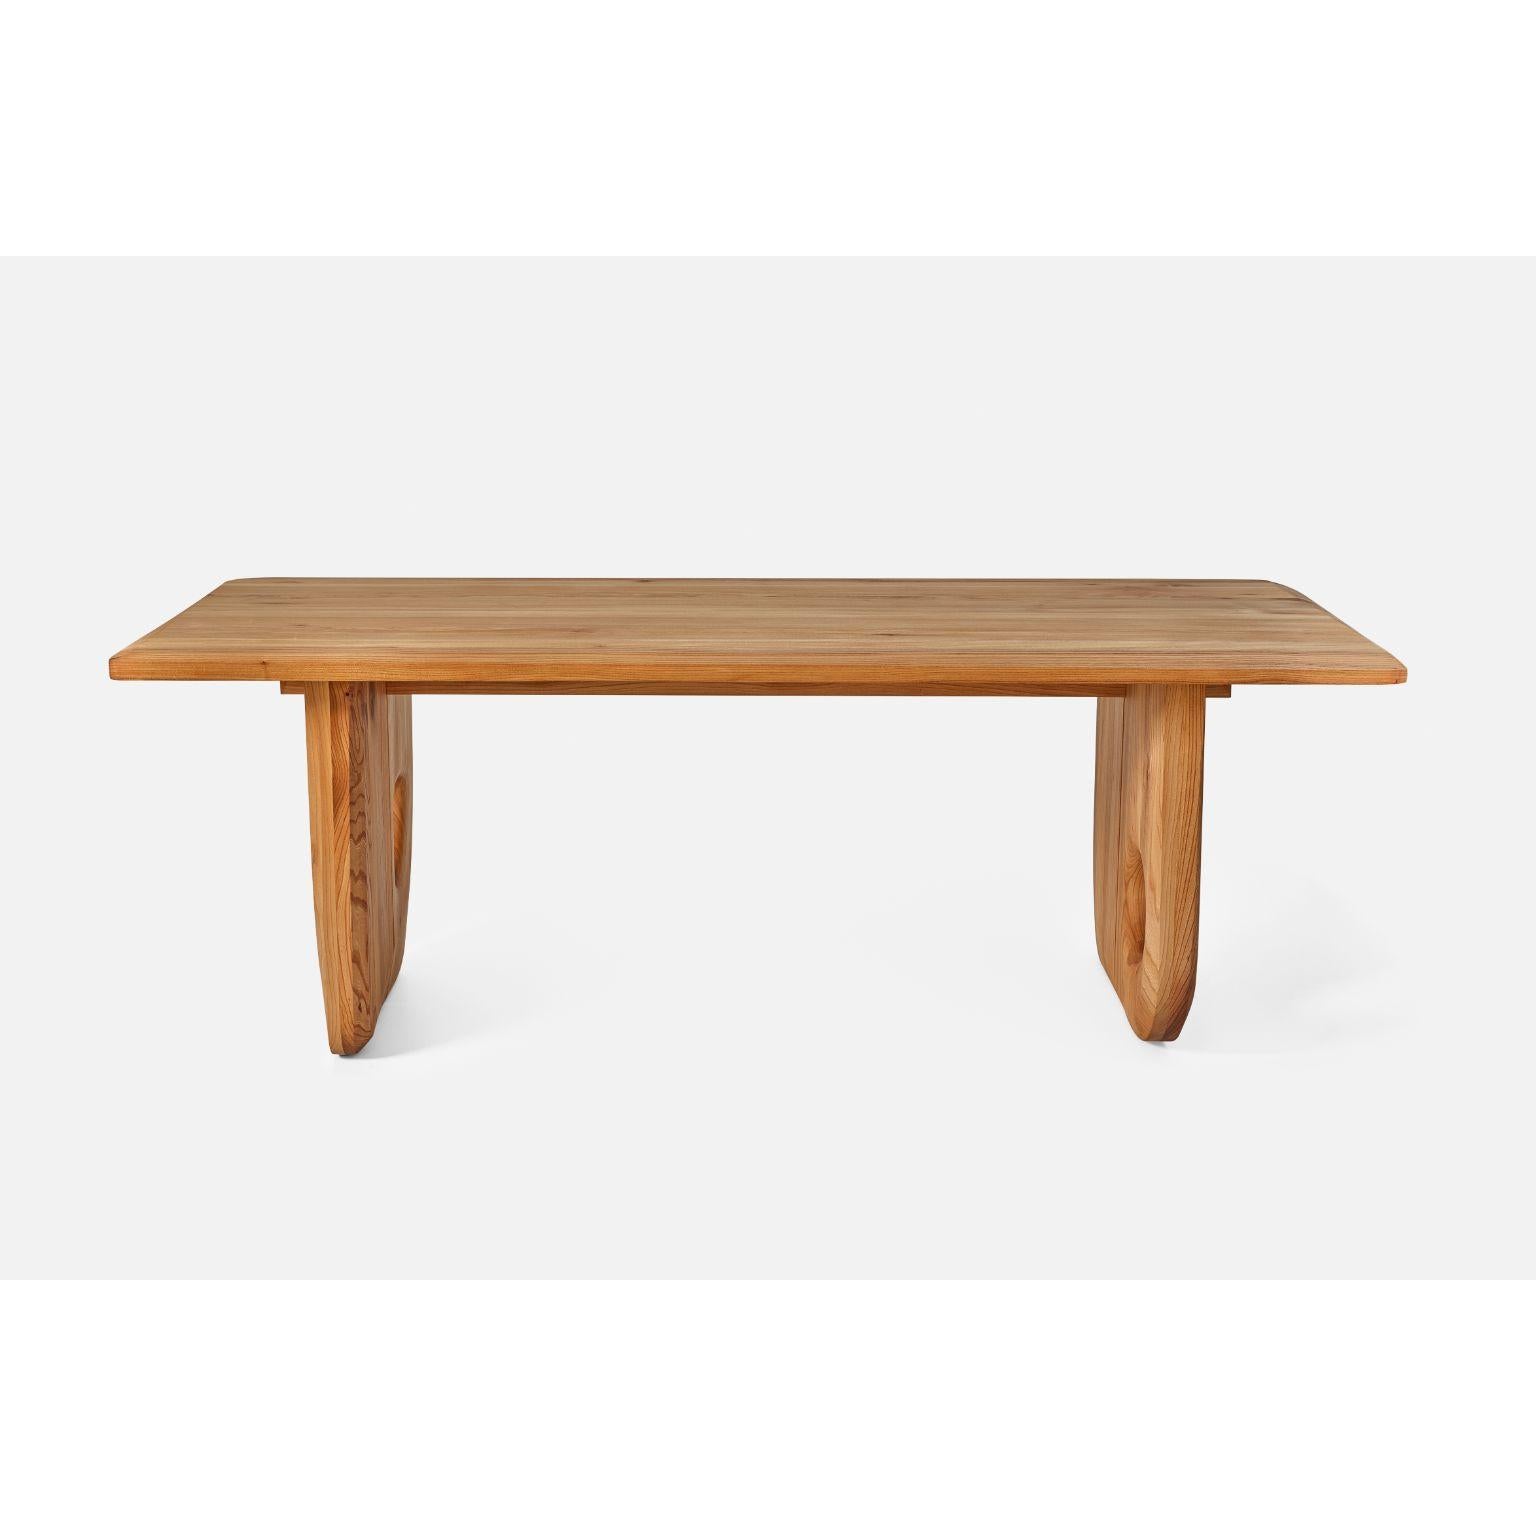 Herseh Dining Table M by Contemporary Ecowood
Dimensions: W 95 x D 215 x H 75 cm.
Materials: American Oak.
Color: Natural

Contemporary Ecowood’s story began in a craft workshop in 2009. Our wood passion made us focus on fallen trees in the